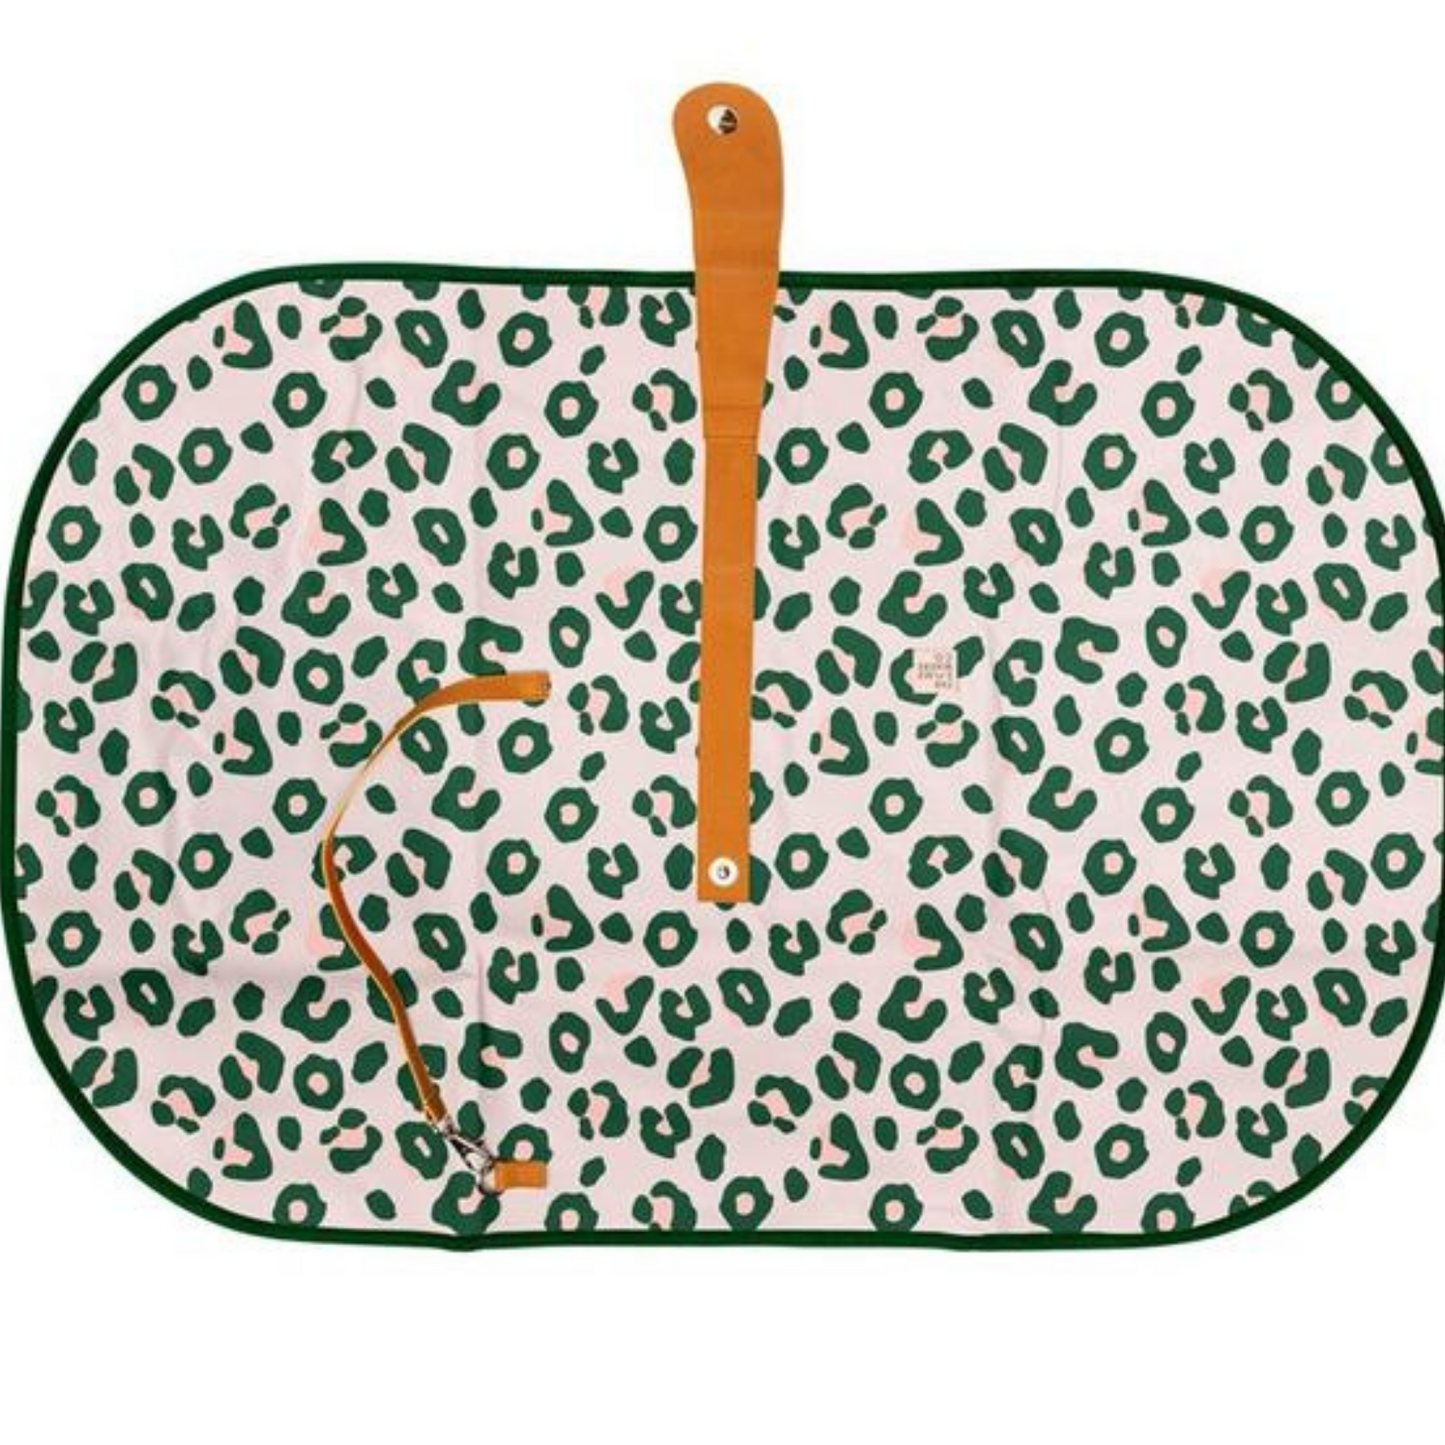 THE SOMEWHERE CO. - Gone Wild Travel Baby Change Mat